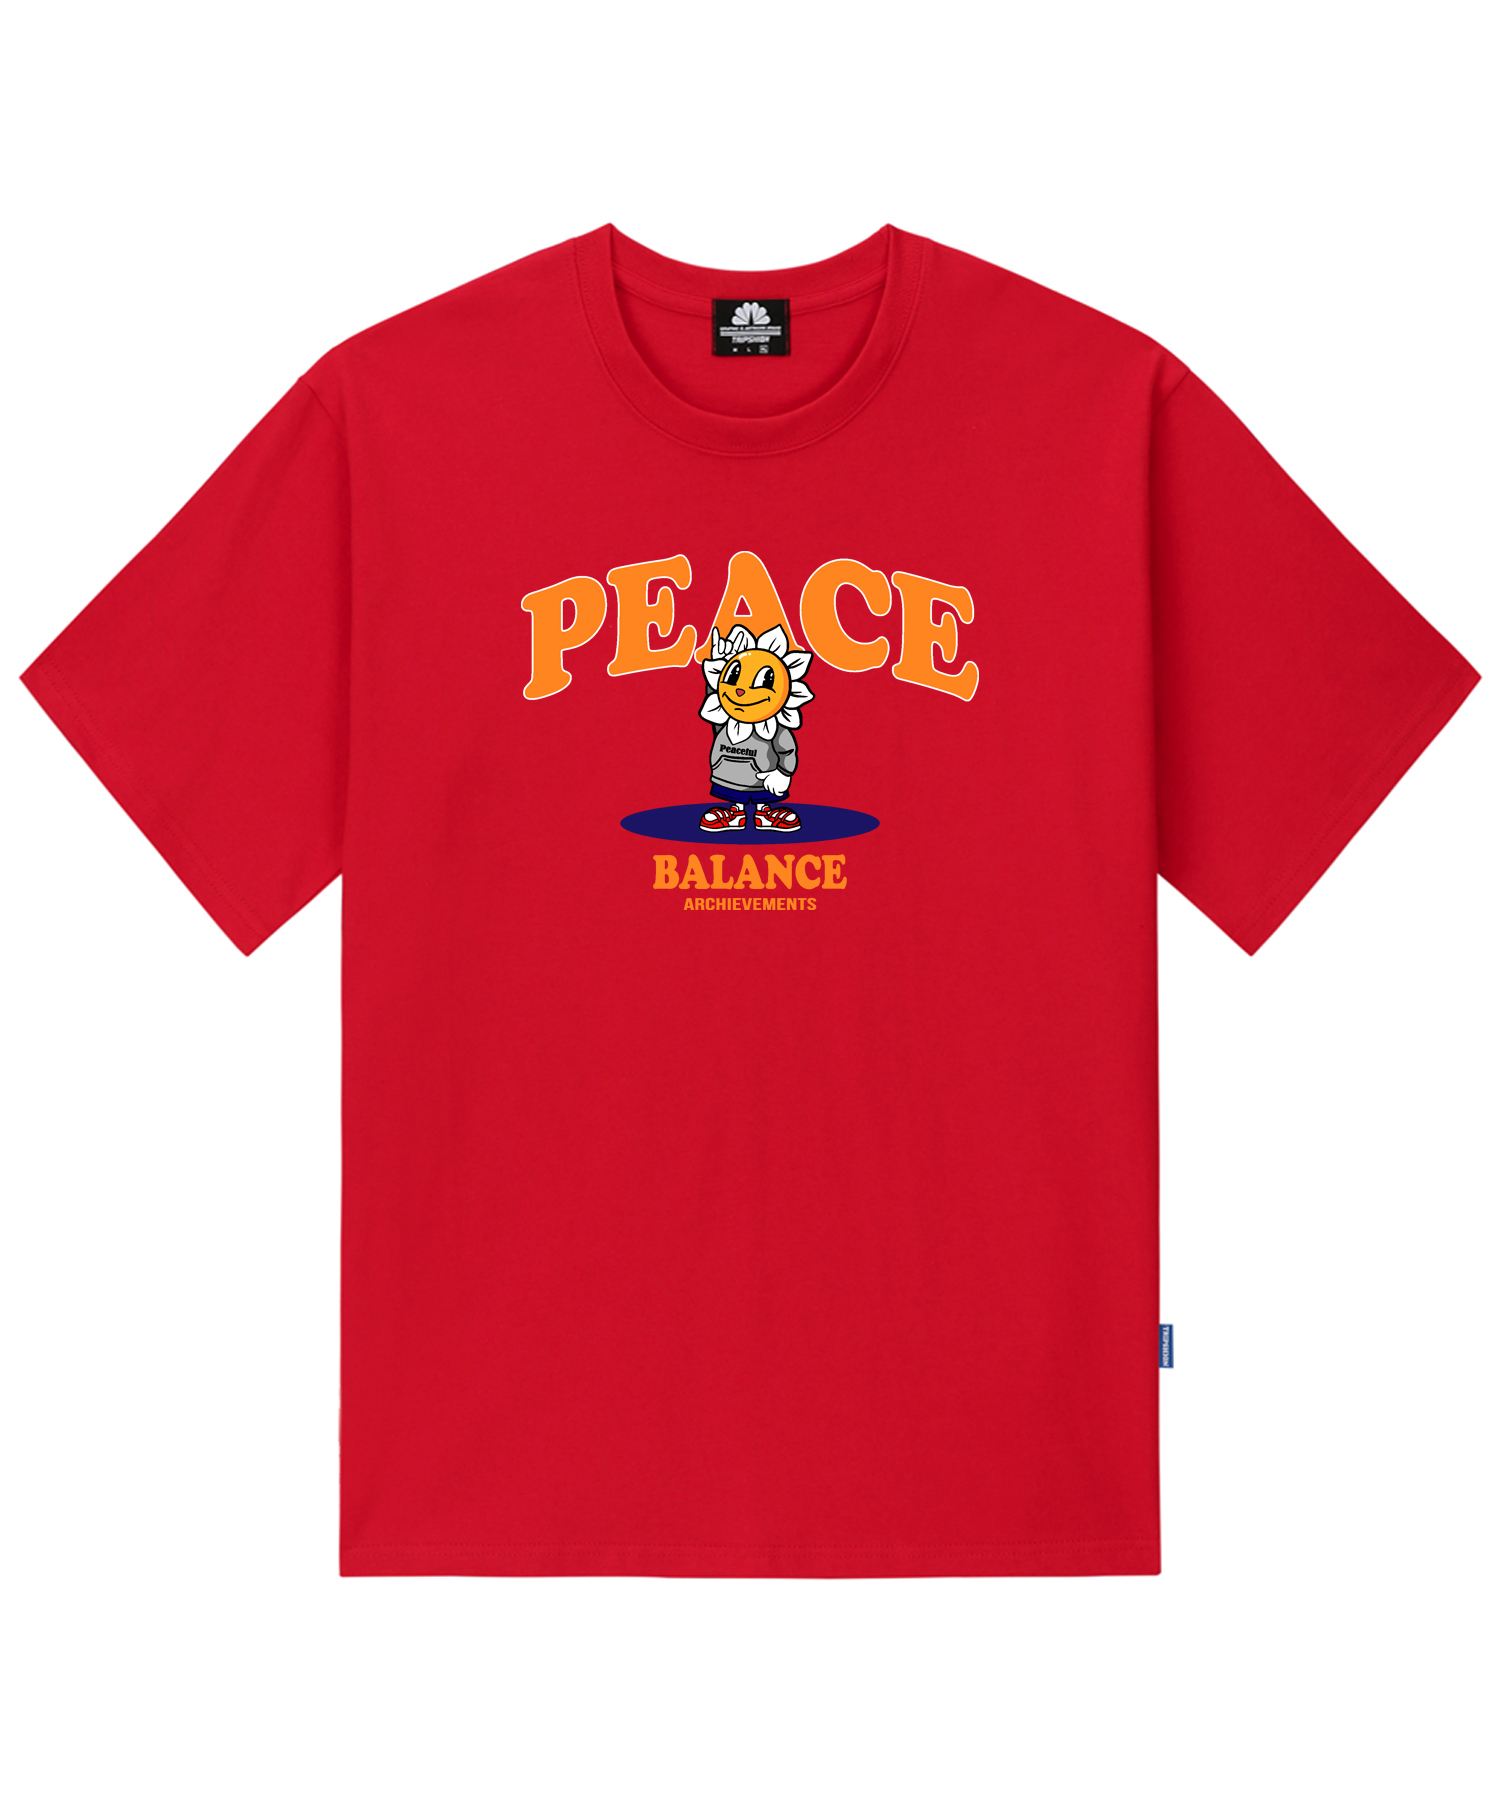 PEACE TIGER GRAPHIC T-SHIRTS - RED